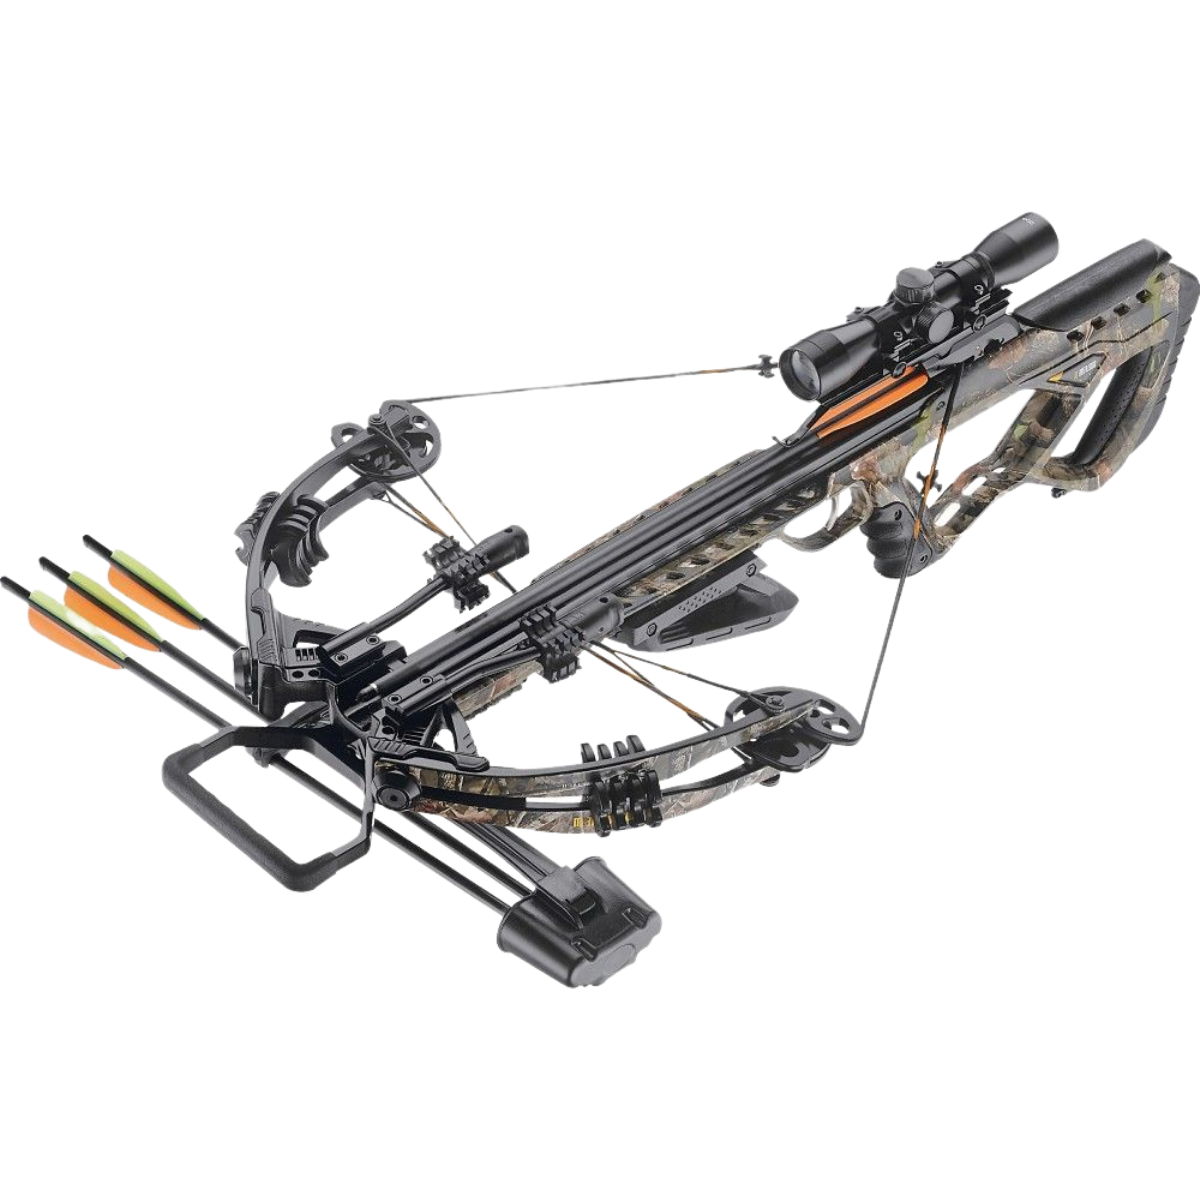 EK Archery Guillotine-M+ Compound Crossbow Package 370fps - Fast UK Shipping | Tactical Archery UK